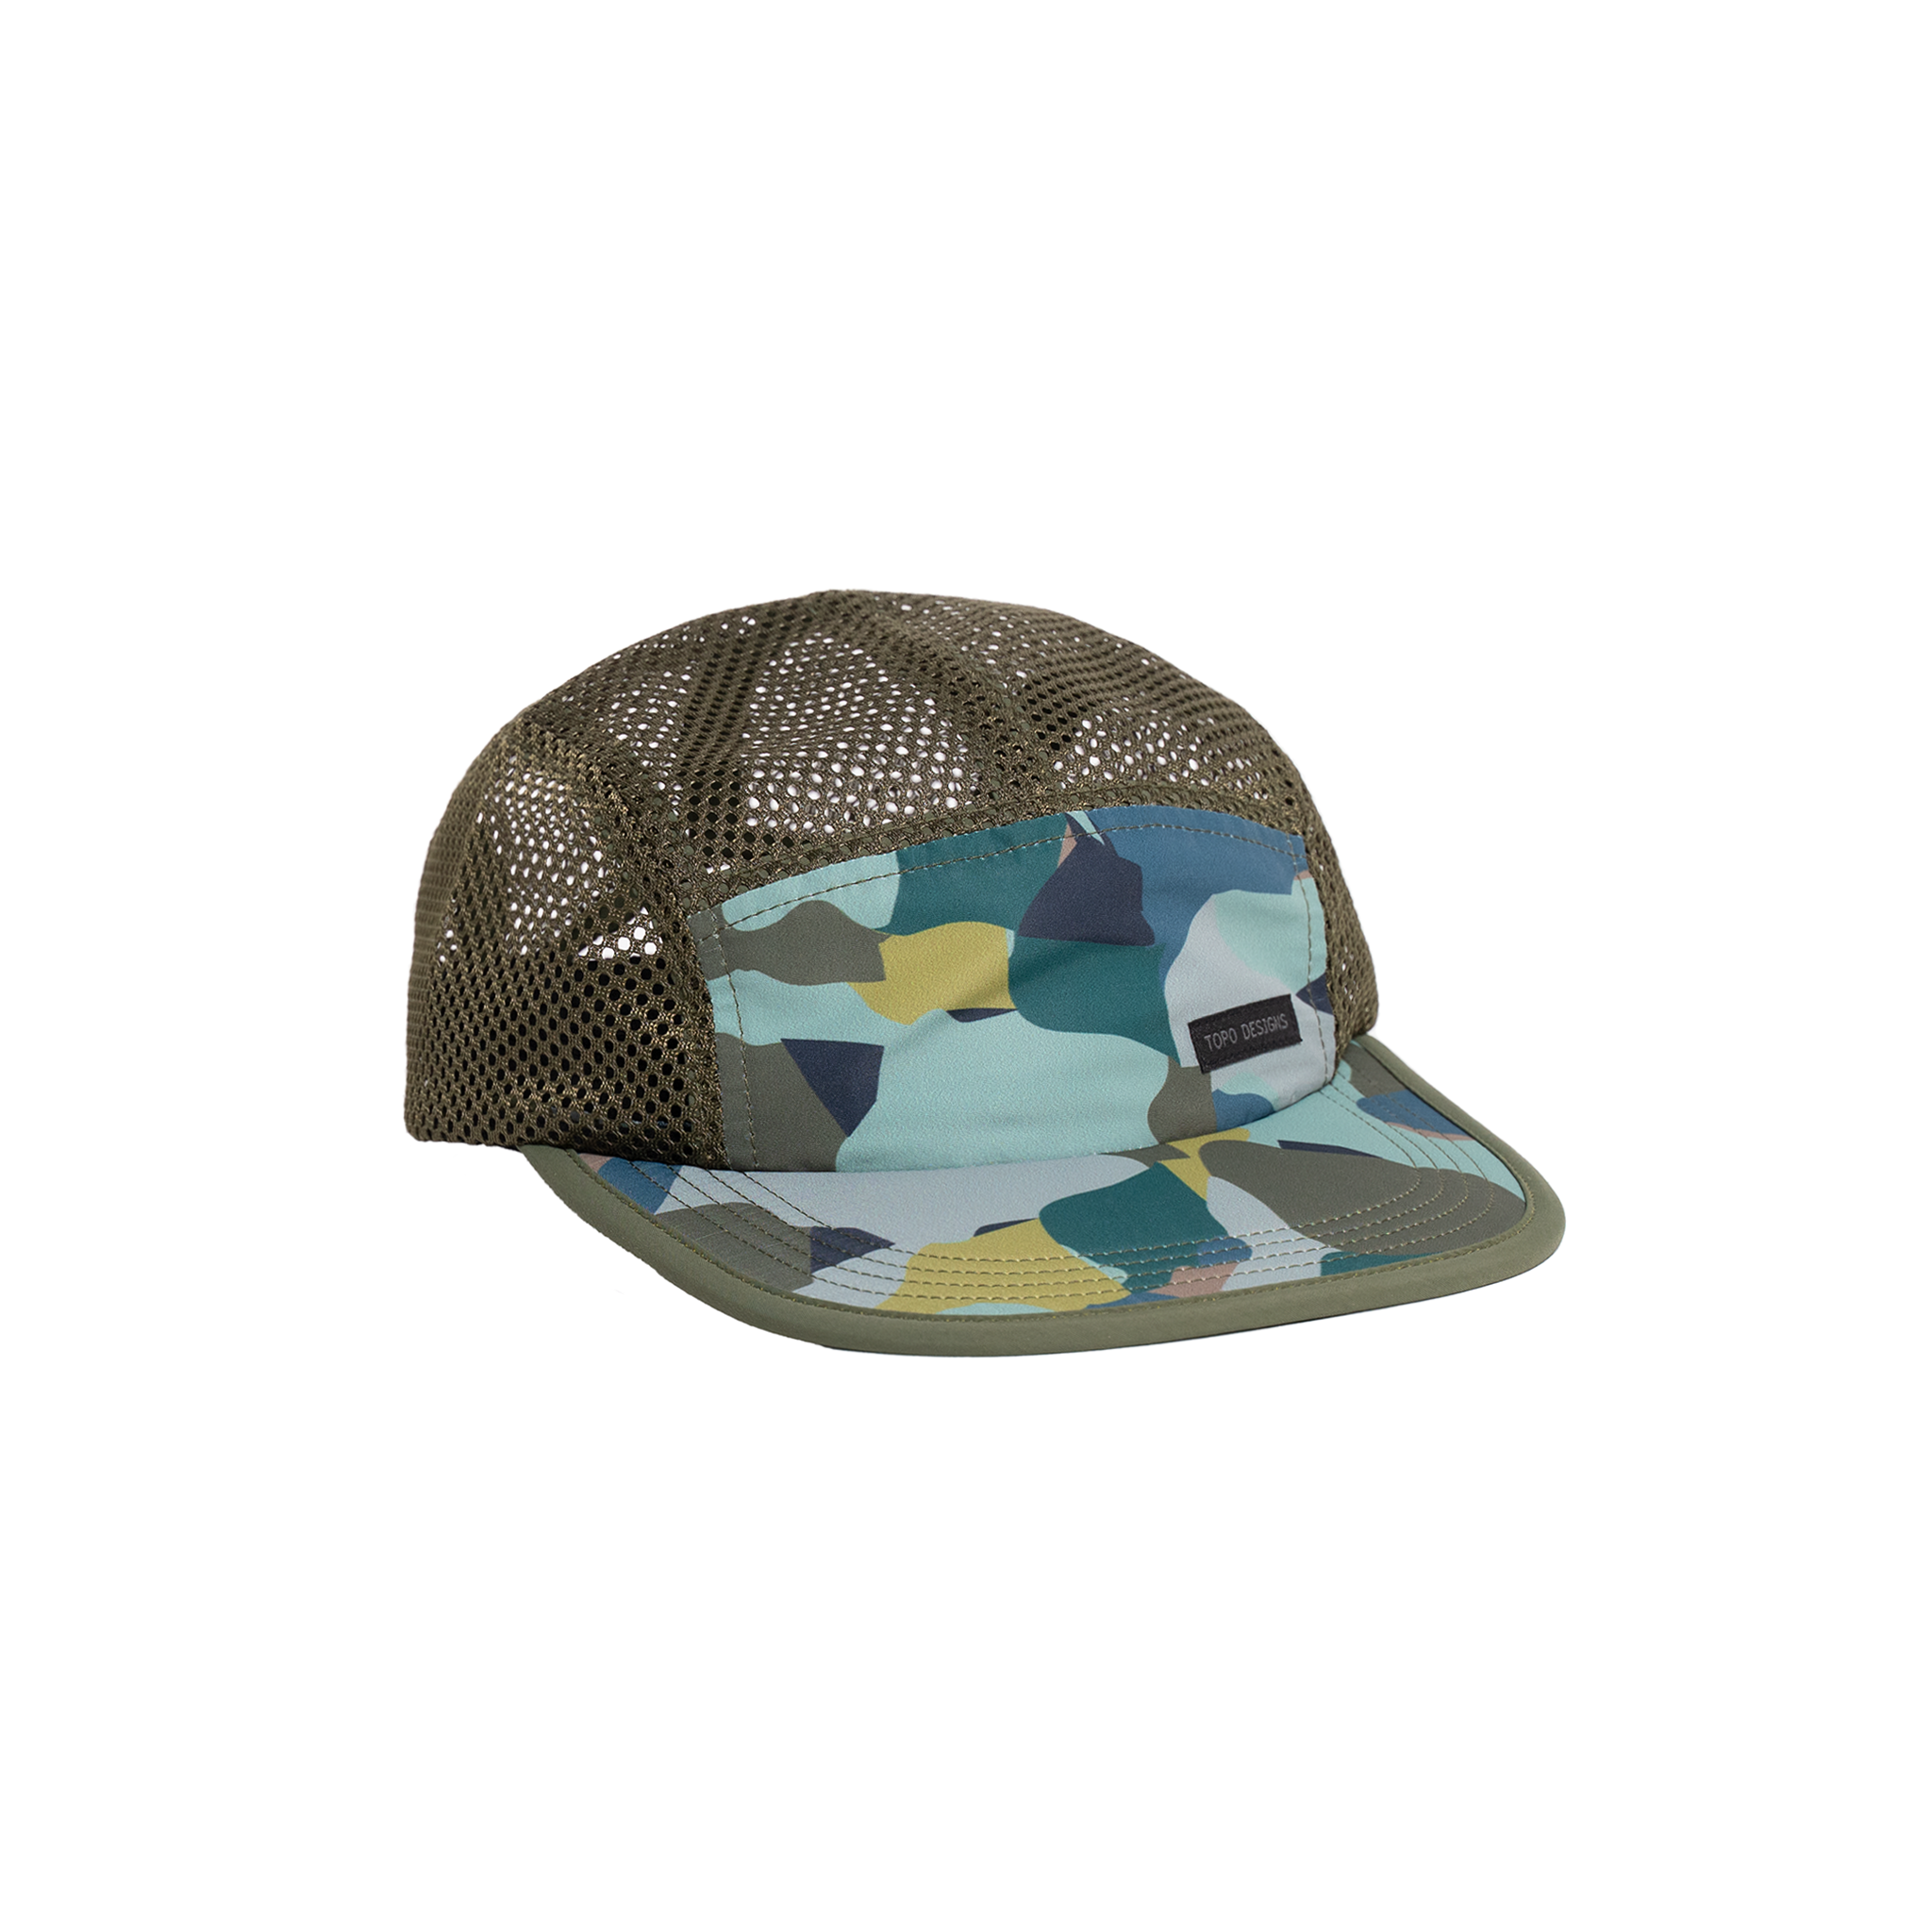 Topo Designs Global mesh back Hat in "Green Camo" green. Unstructured 5-panel flexible brim packable hat.